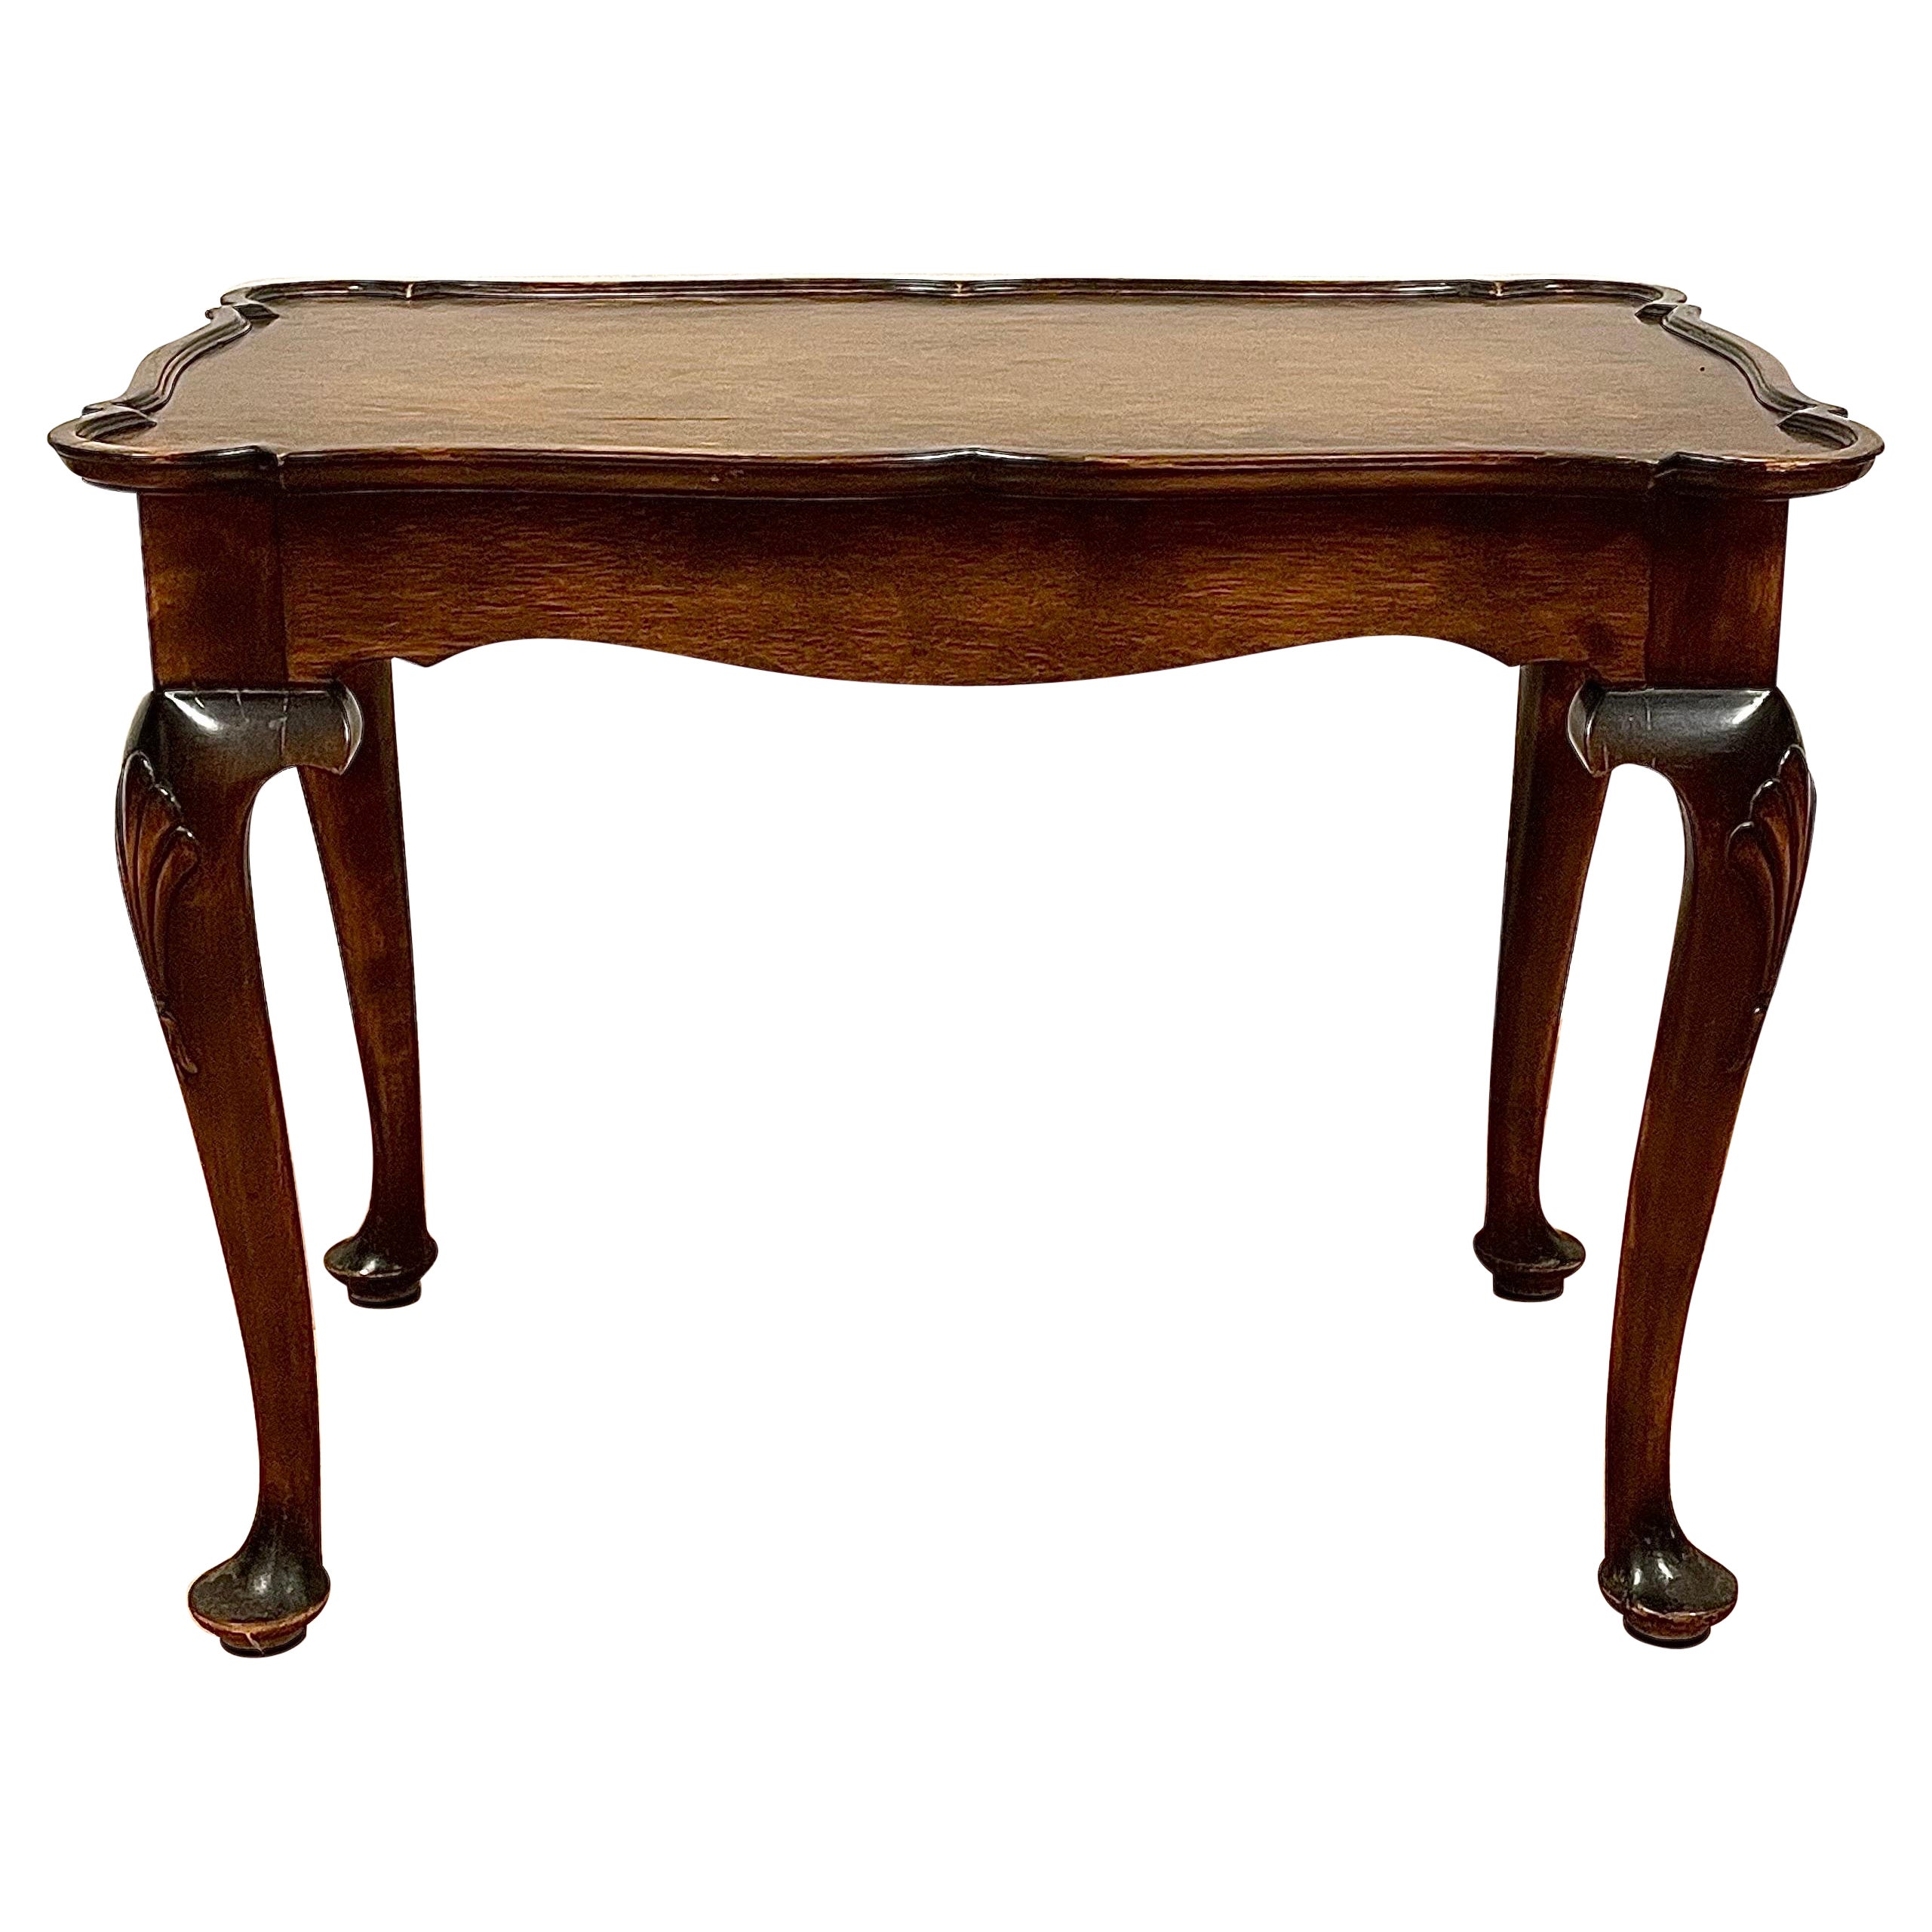 Swedish Tray Table in Stained Birch Manufactured 13/3 1929 by Nordiska Kompaniet For Sale